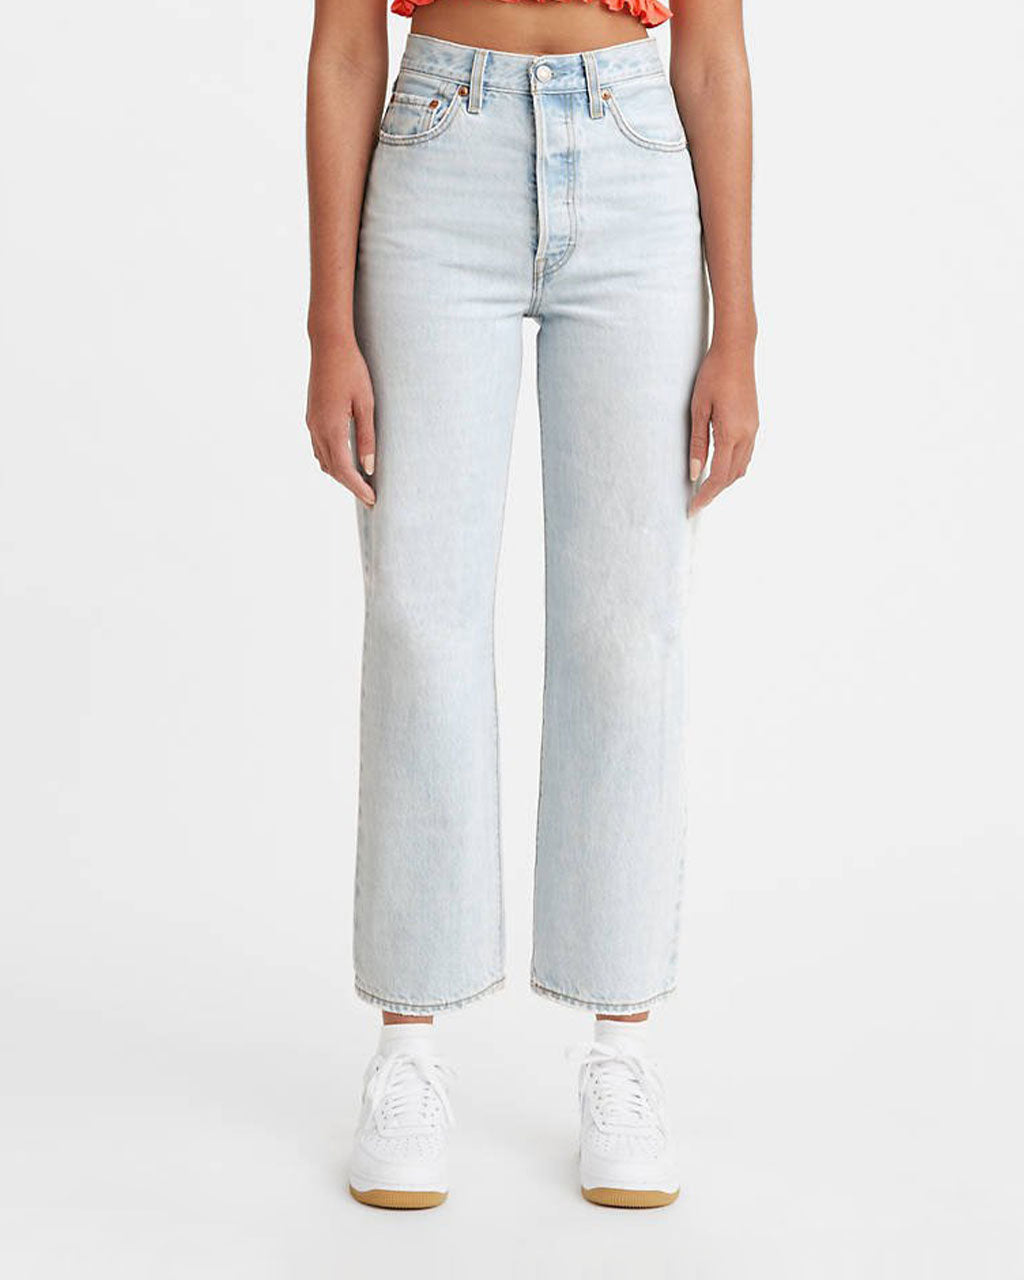 Ribcage Straight Ankle - Ojai Shore by Levi's - jeans 